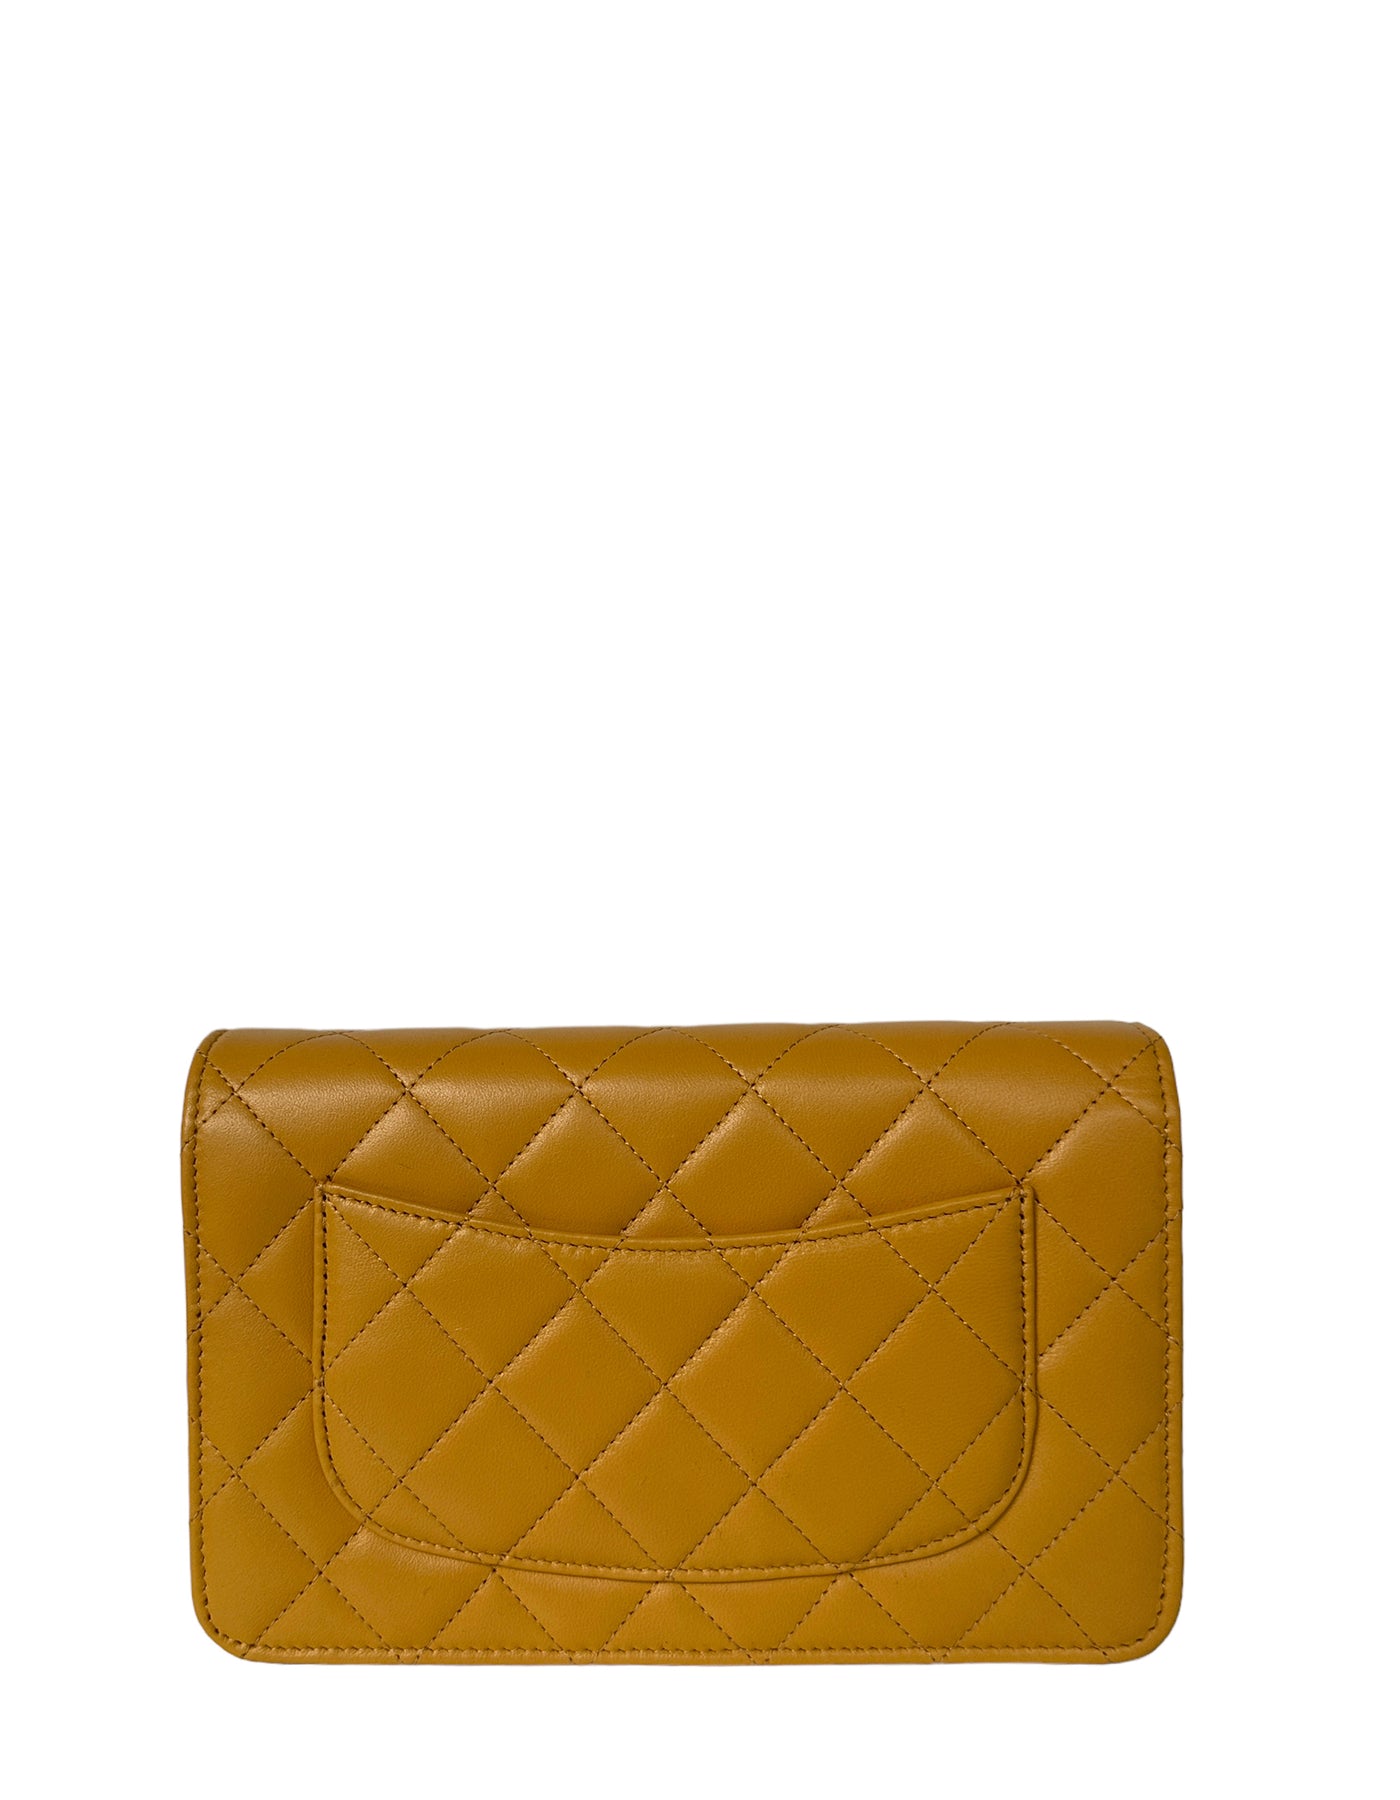 Chanel Yellow Caviar Leather CC Flap Wallet On Chain Bag Chanel